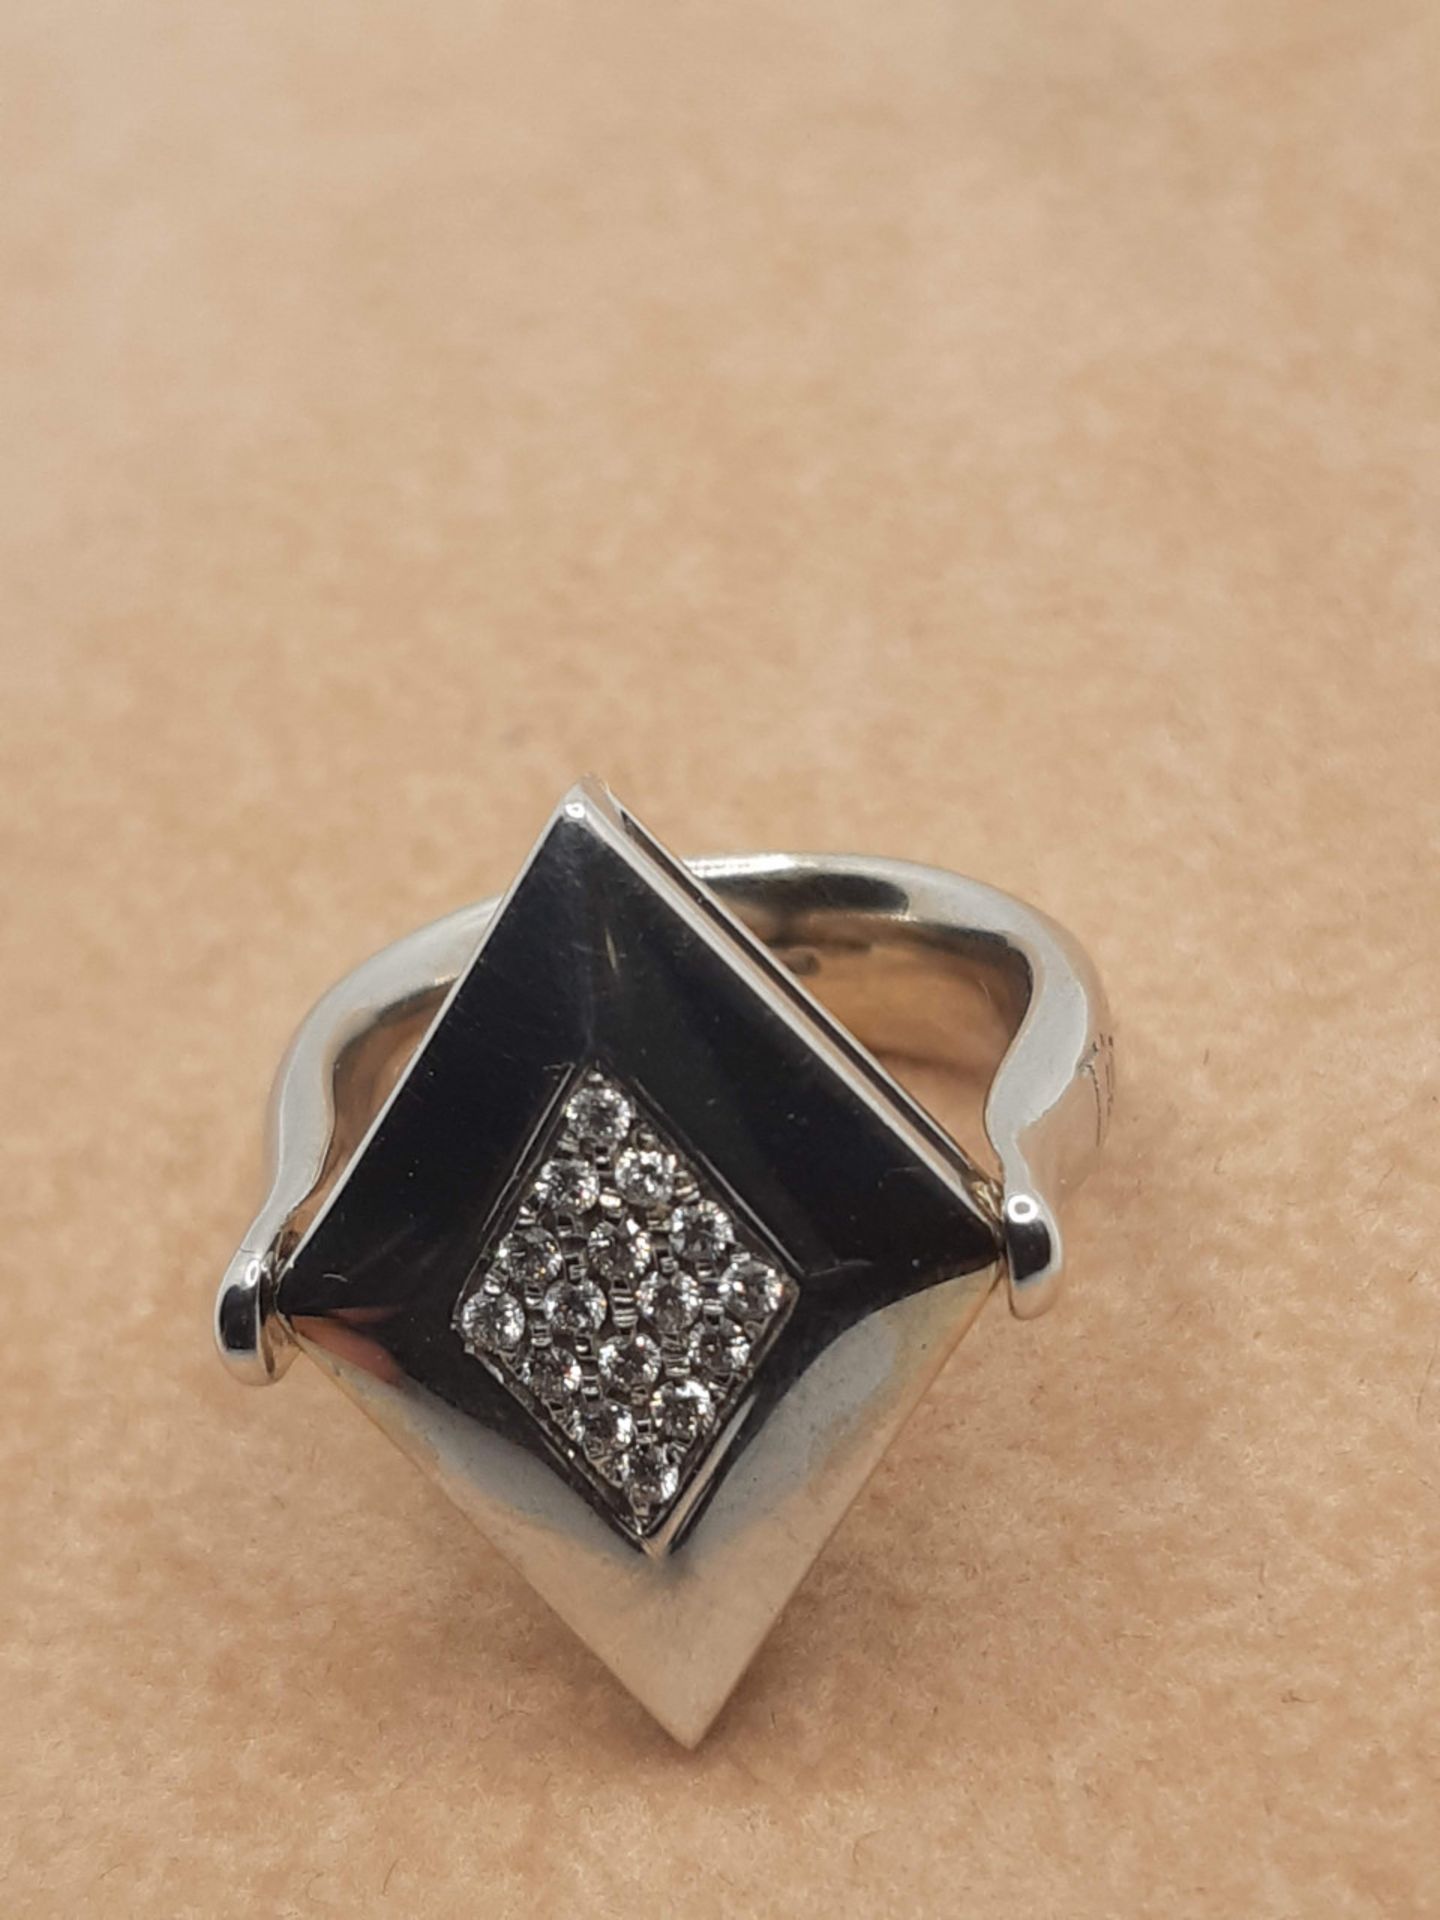 NEW 18K WHITE GOLD RING - DOUBLE FACE WITH RUMBLE IN YELLOW GOLD AND RHOMBUS WITH PAVE 'OF